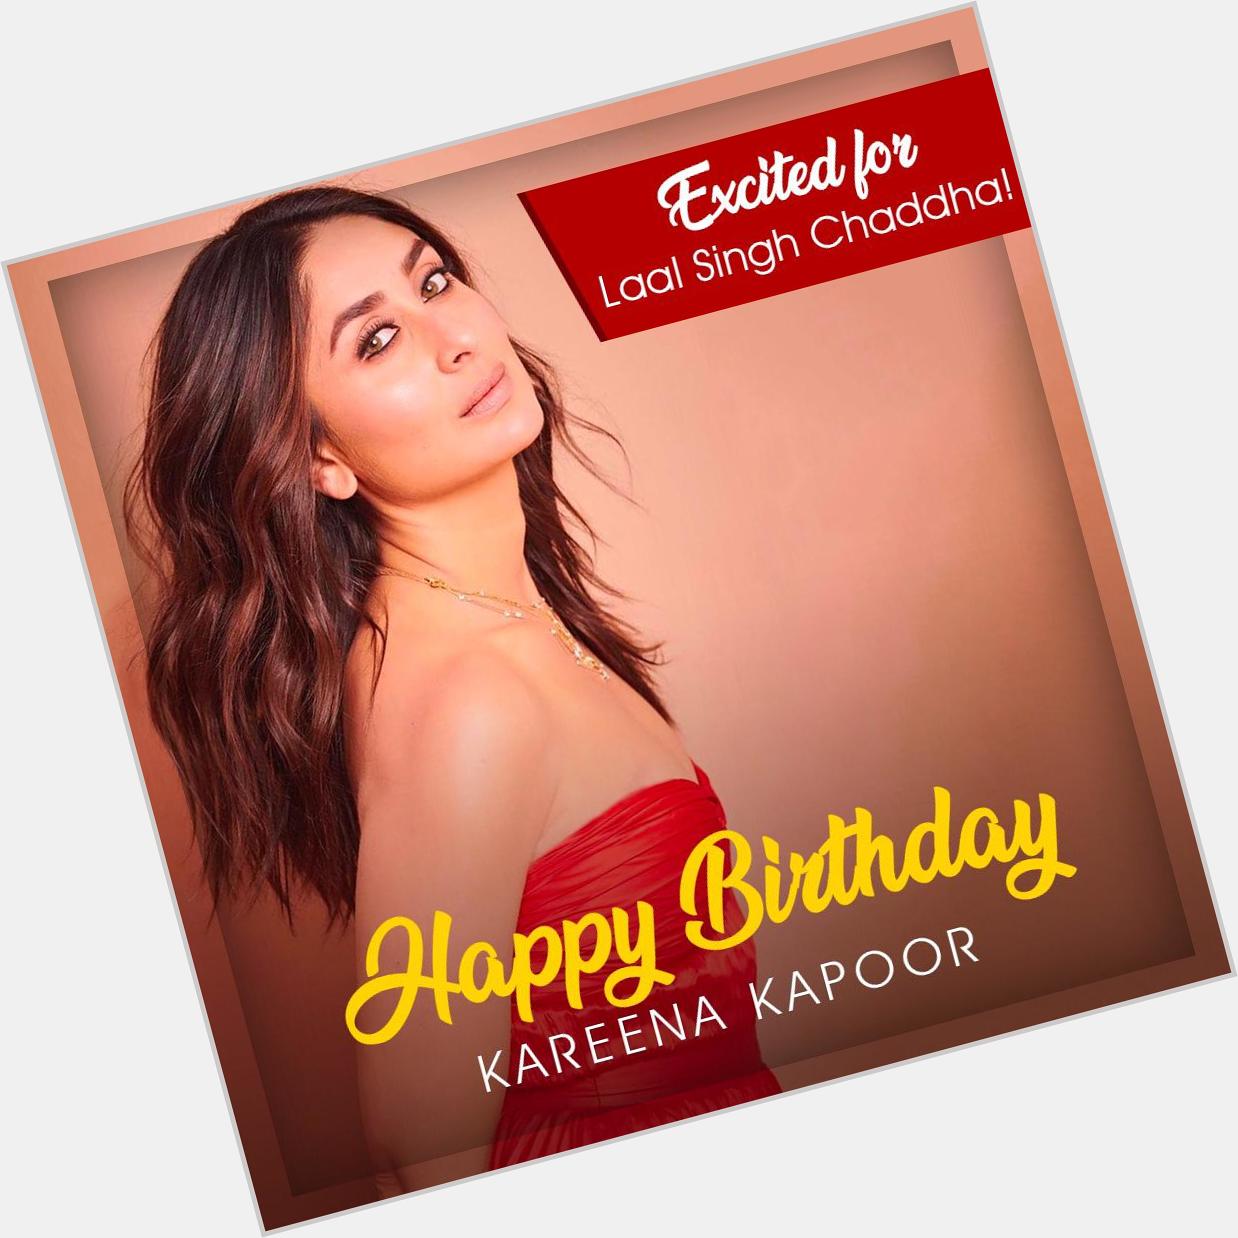 Happy Birthday Kareena Kapoor Khan... Excited to see you with Sir, again. 